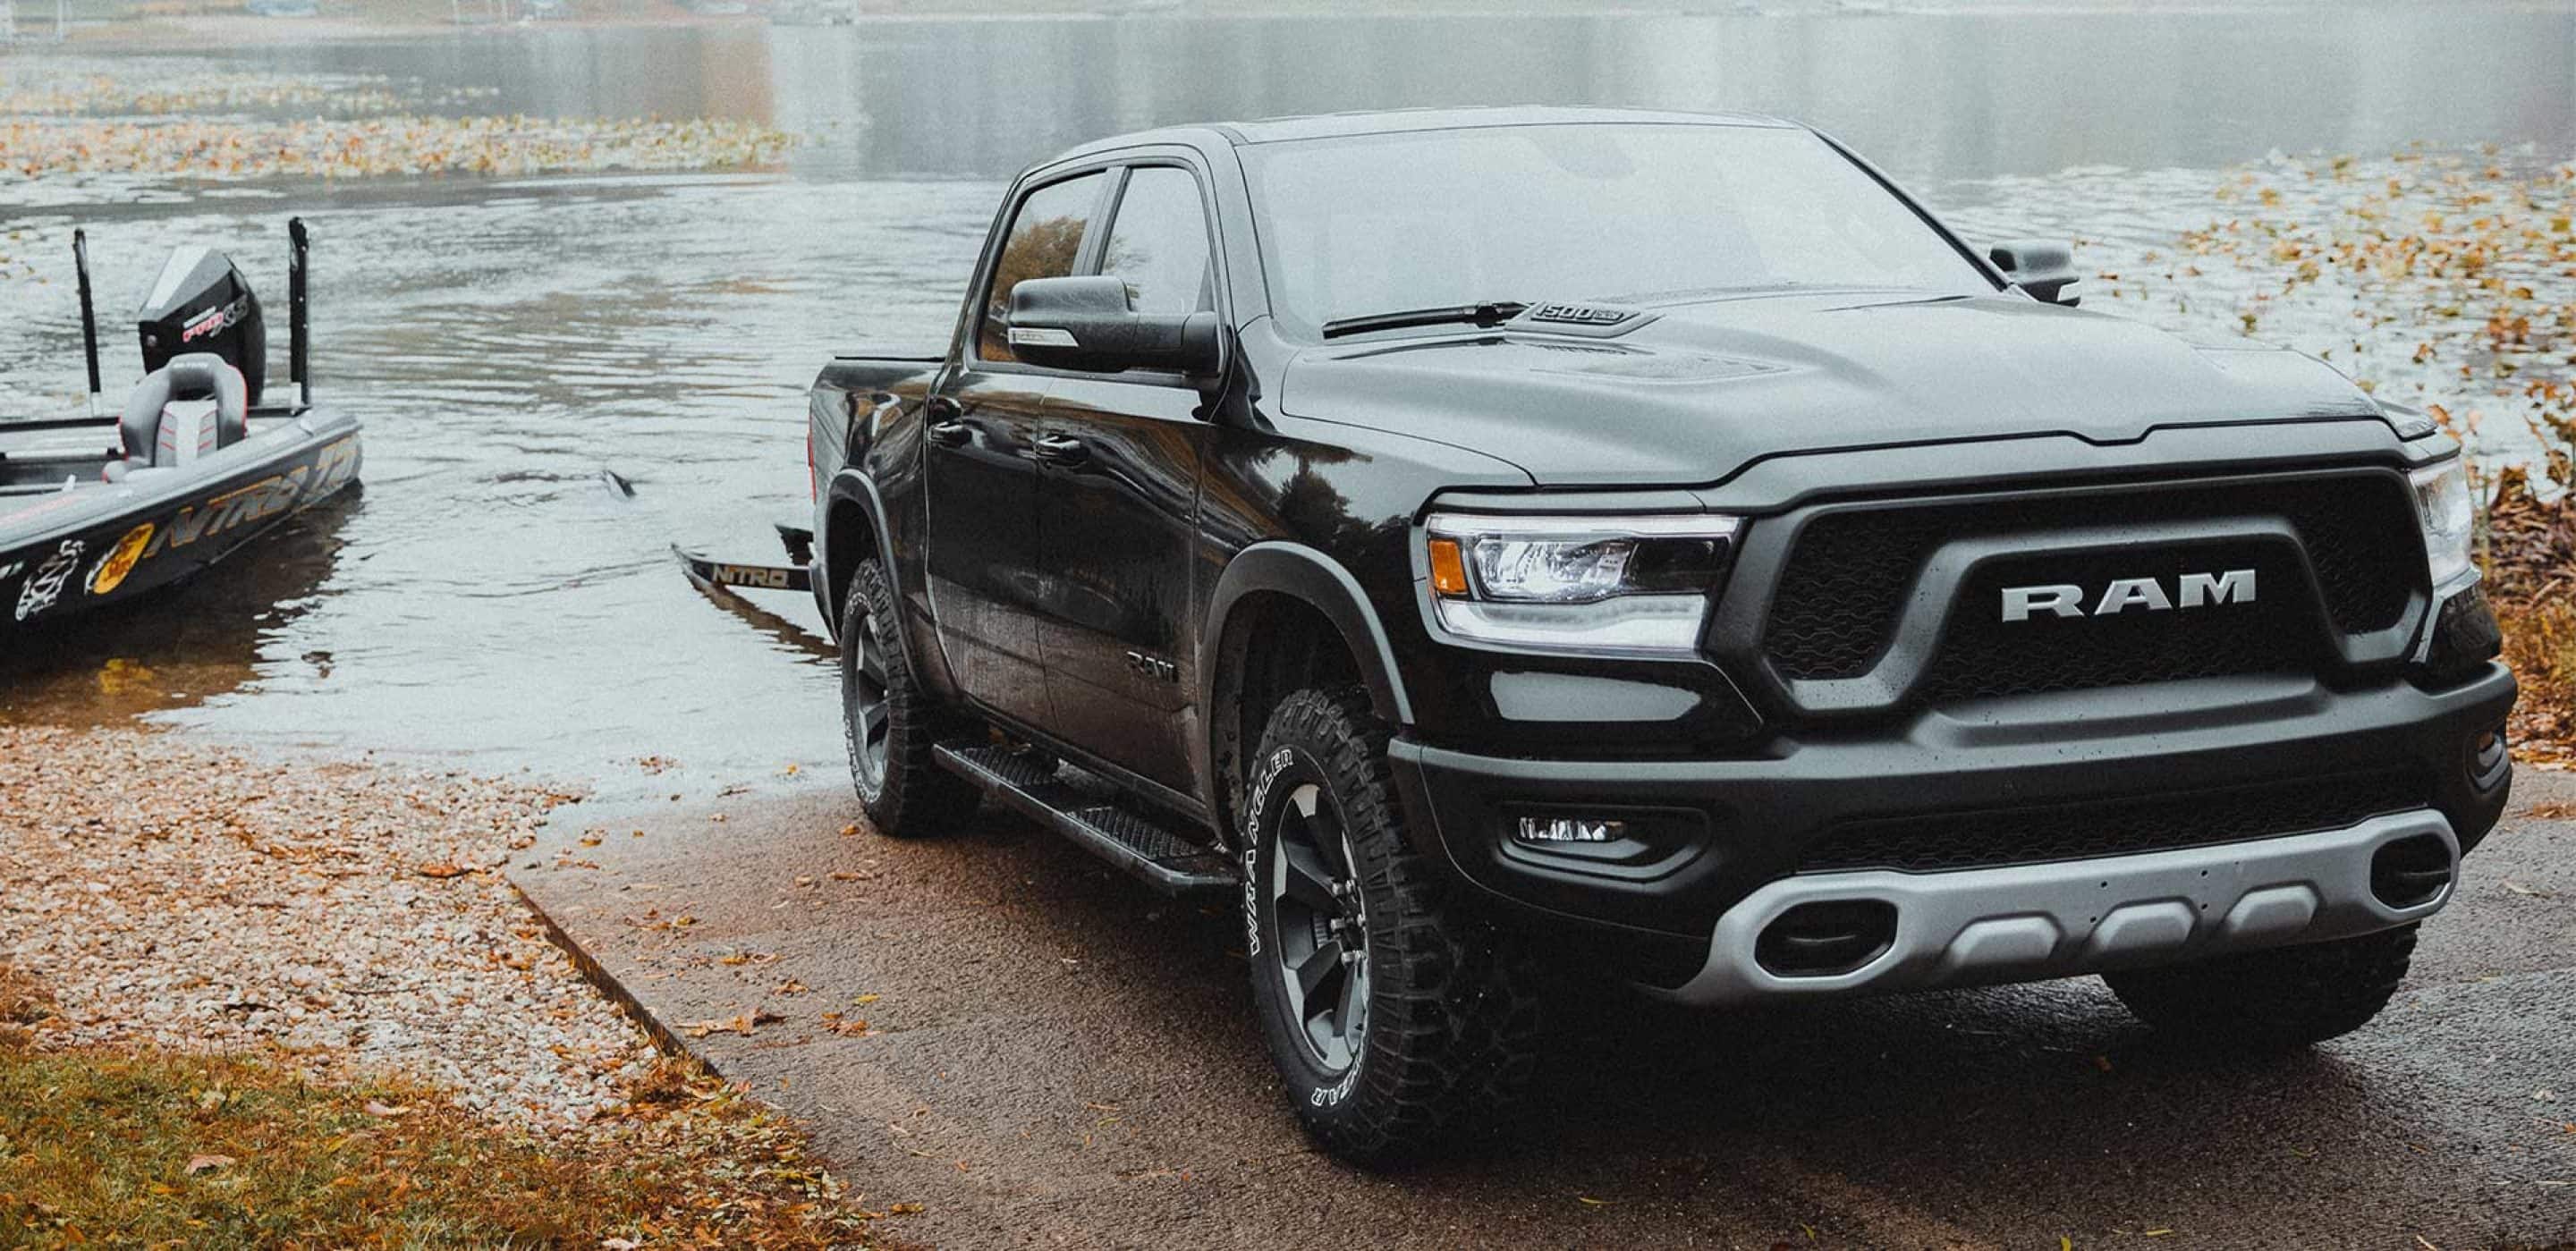 2023 Ram 1500 Backcountry X Concept Highlights Improved Outdoor Concept   Kendall Dodge Chrysler Jeep Ram 2023 Ram 1500 Backcountry X Concept  Highlights Improved Outdoor Concept